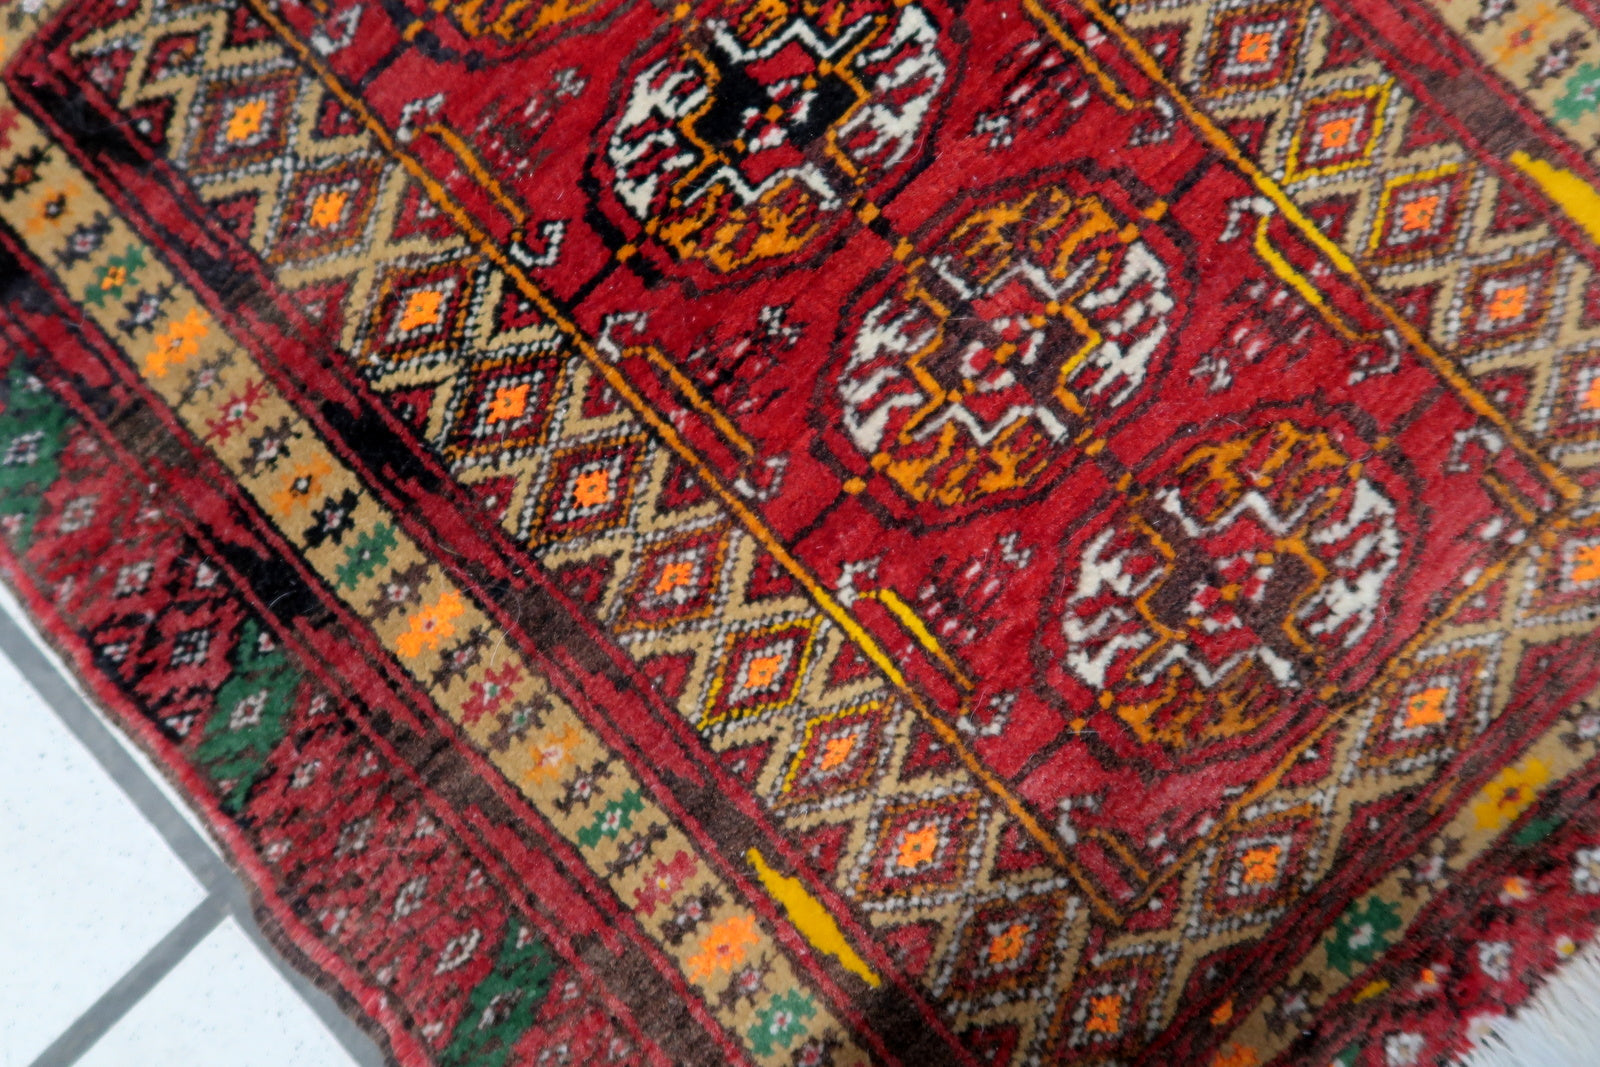 Close-up of the traditional Ersari style motifs on the vintage Afghan mat